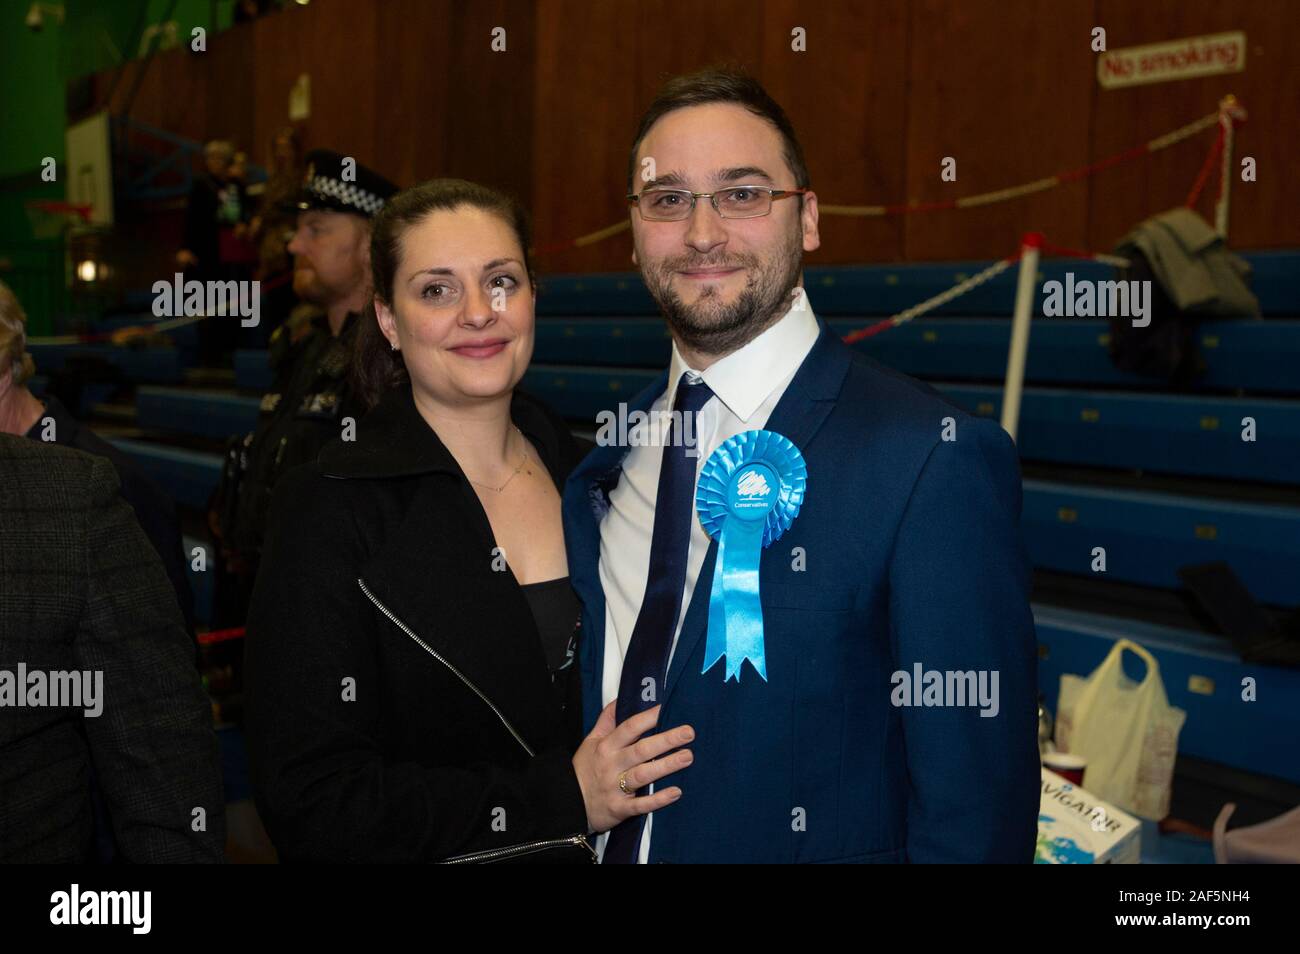 Bury, UK. 13th December 2019. Conservative candidate Christian Wakeford (right) smiles after his win as the results are announced for the UK election 2019 for the parliamentary constituency of Bury South, held at Castle Leisure Centre. Credit: Russell Hart/Alamy Live News Stock Photo